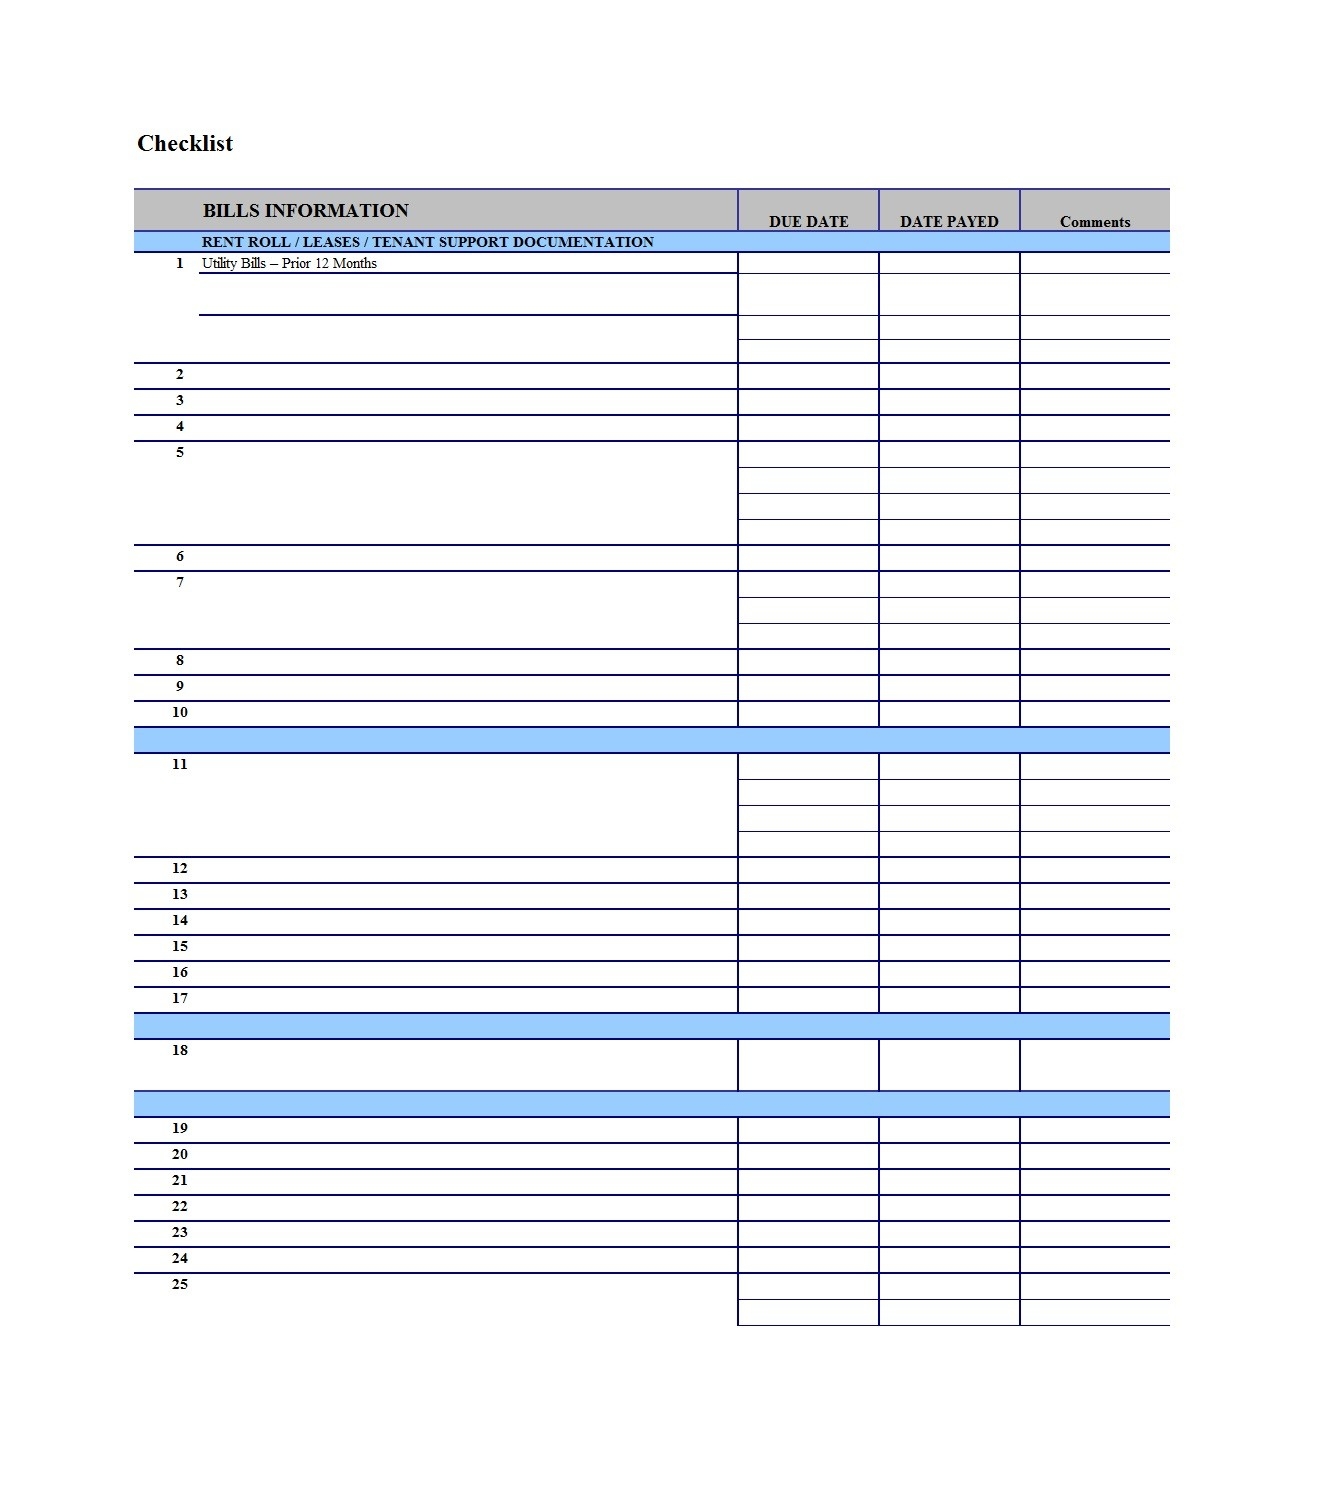 Bill Payment Schedule Mplate Free Pay Checklists Calendars-Monthly Bill Payment Schedule Pdf